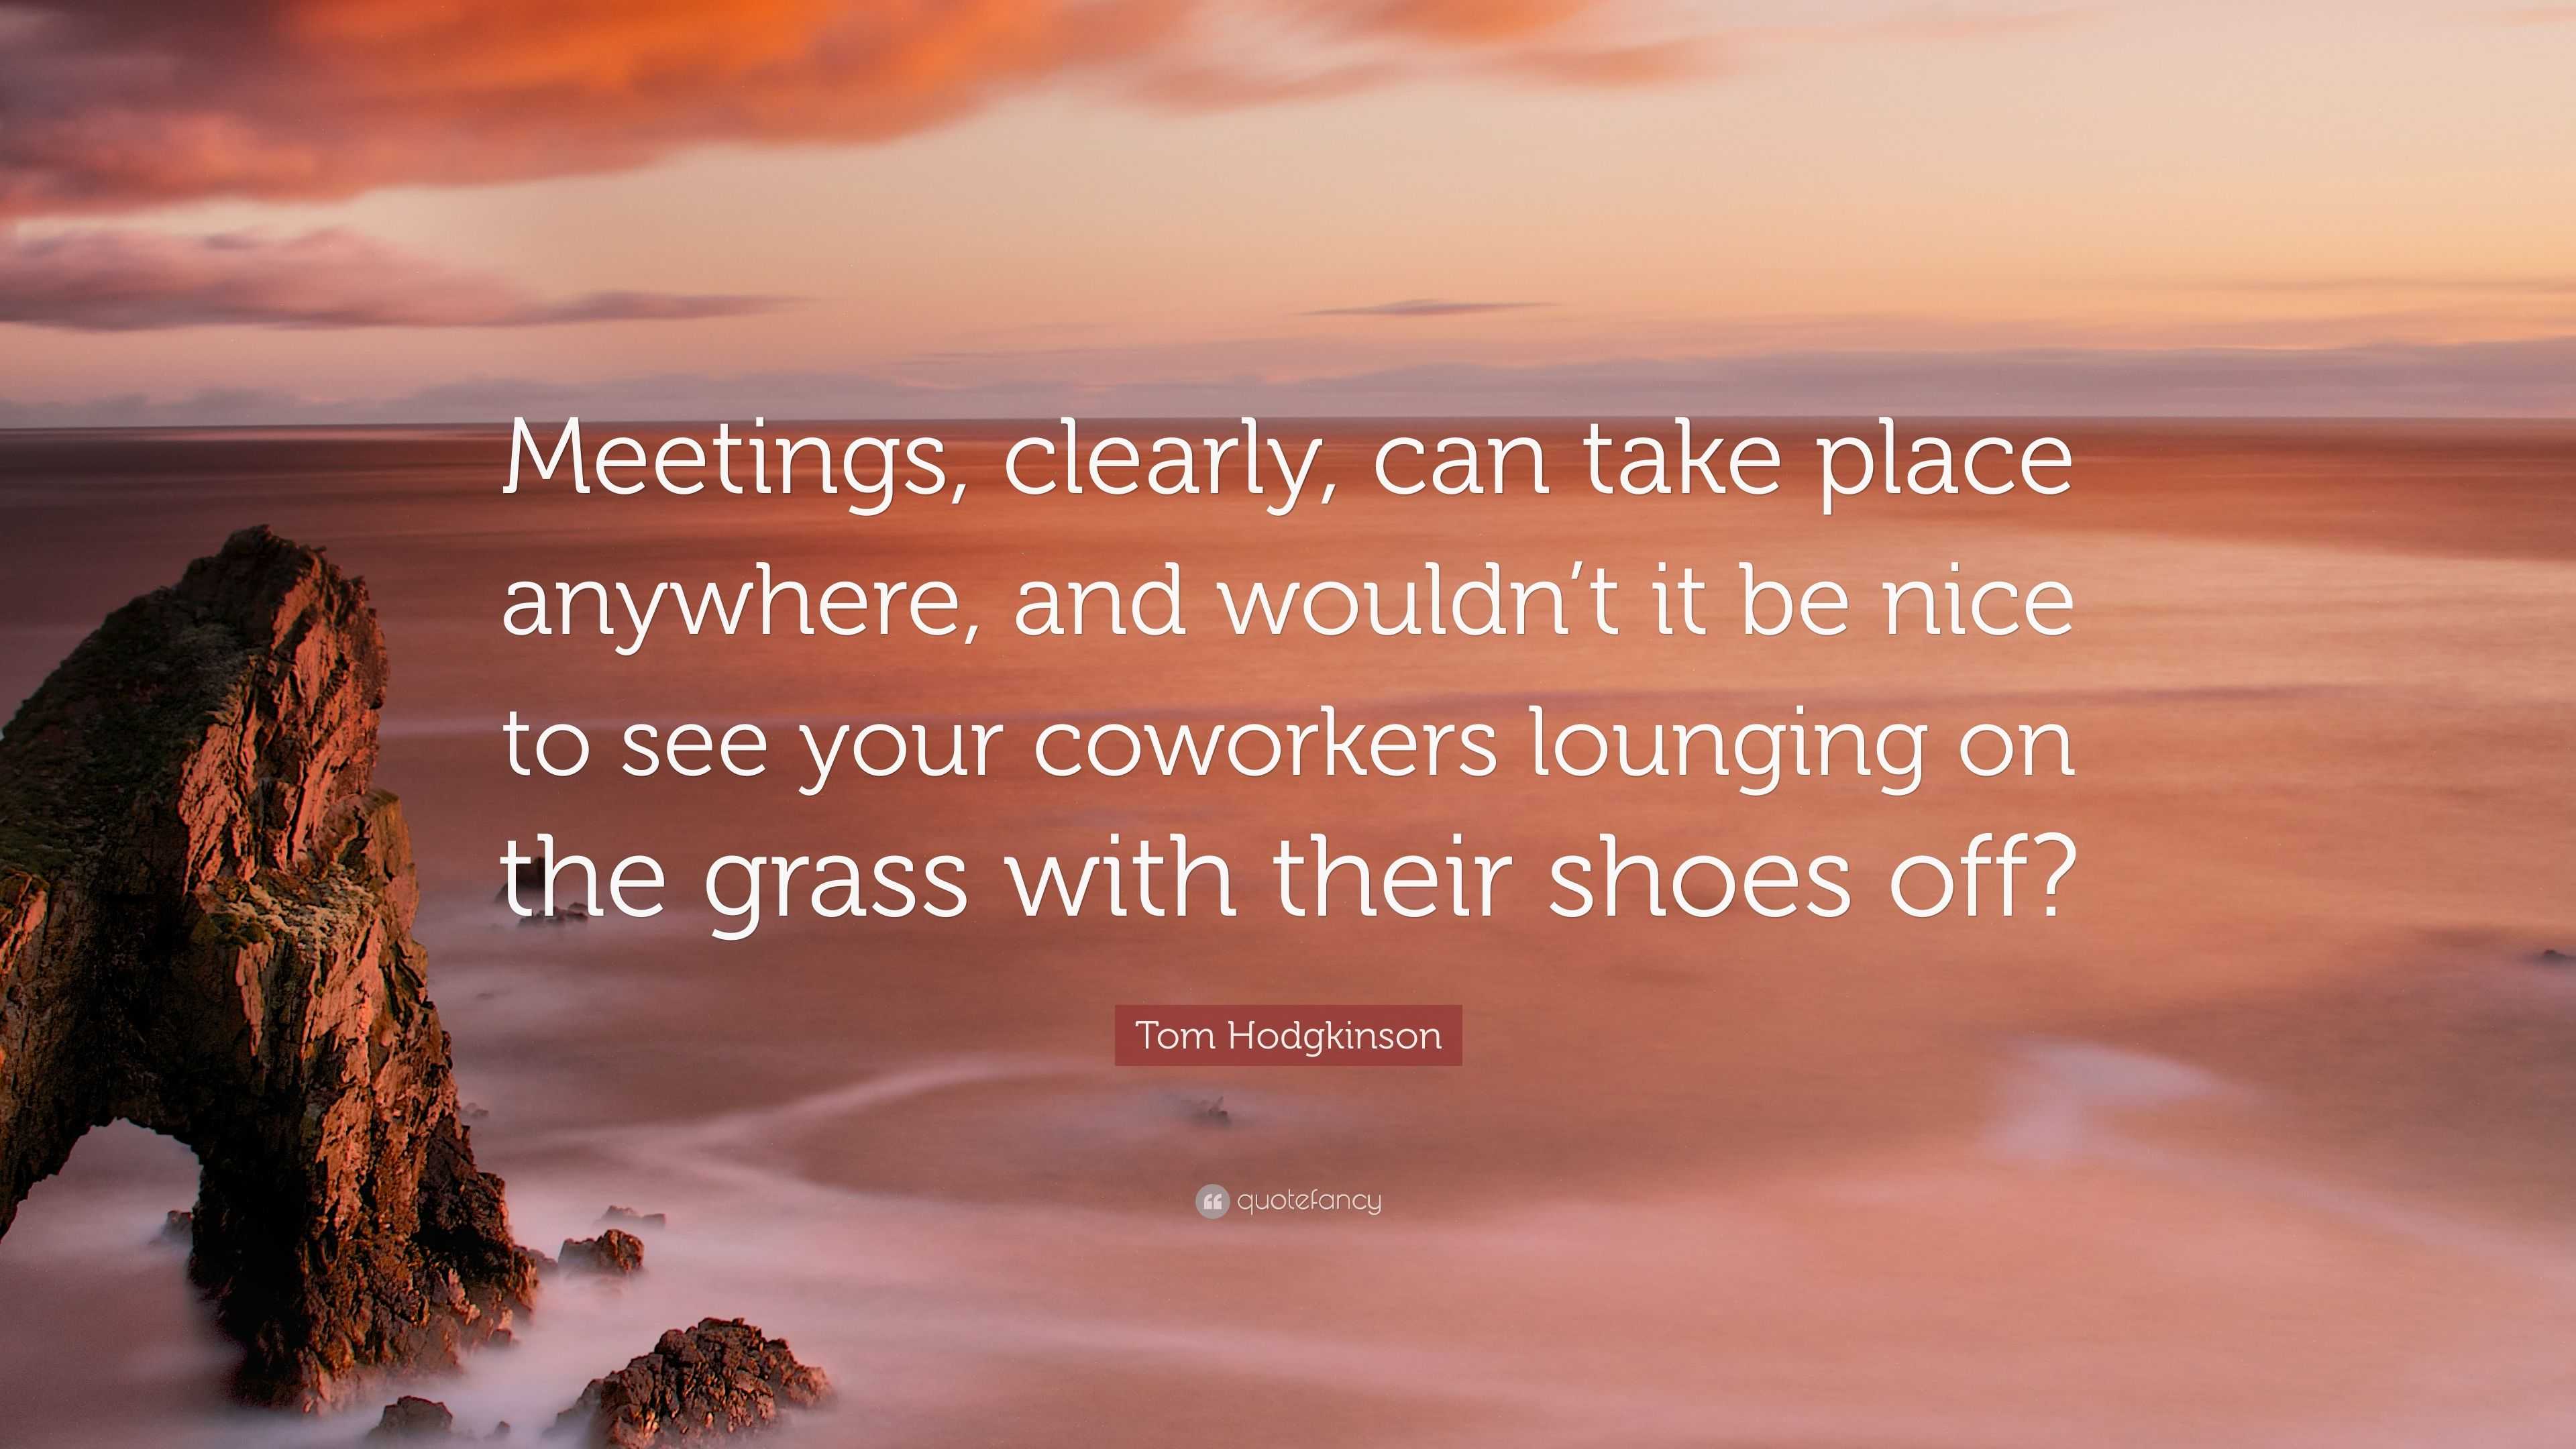 Tom Hodgkinson Quote: “Meetings, clearly, can take place anywhere, and  wouldn't it be nice to see your coworkers lounging on the grass with the...”